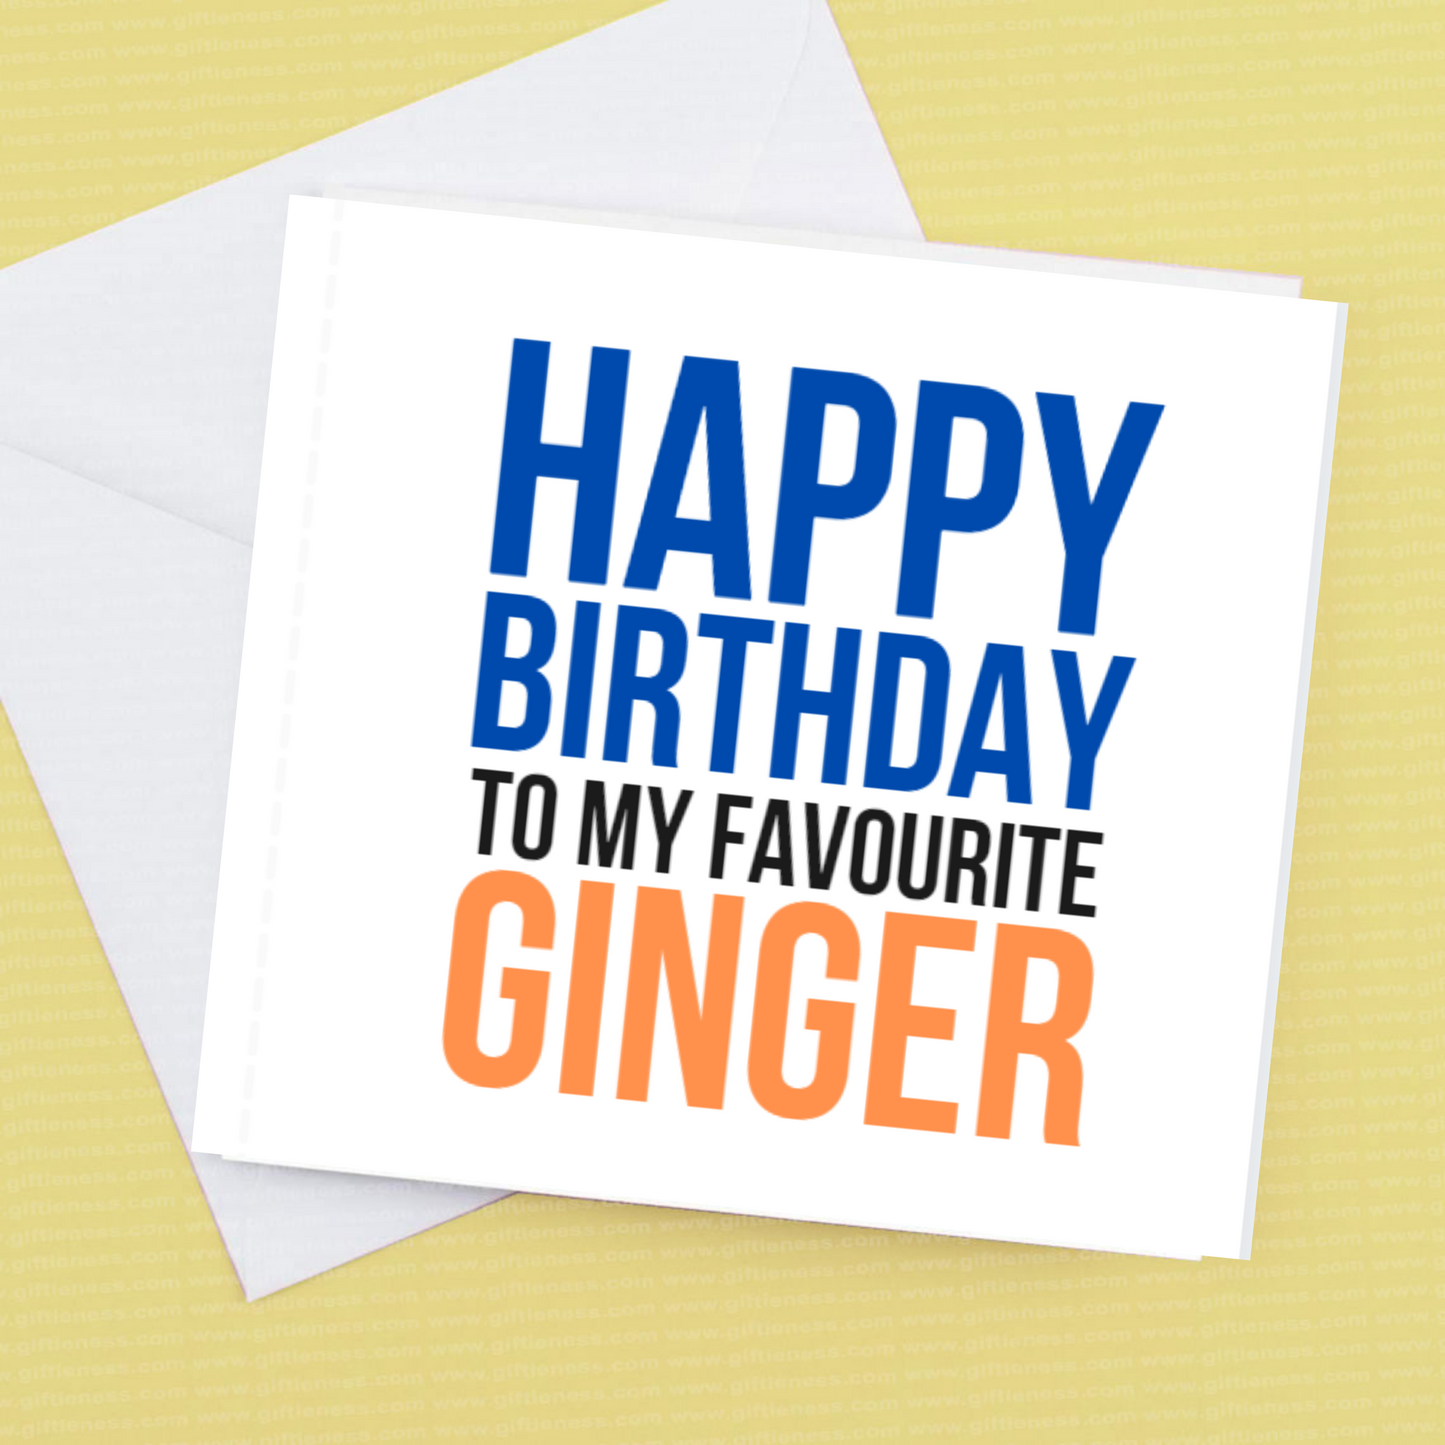 Happy Birthday to my Favourite Ginger